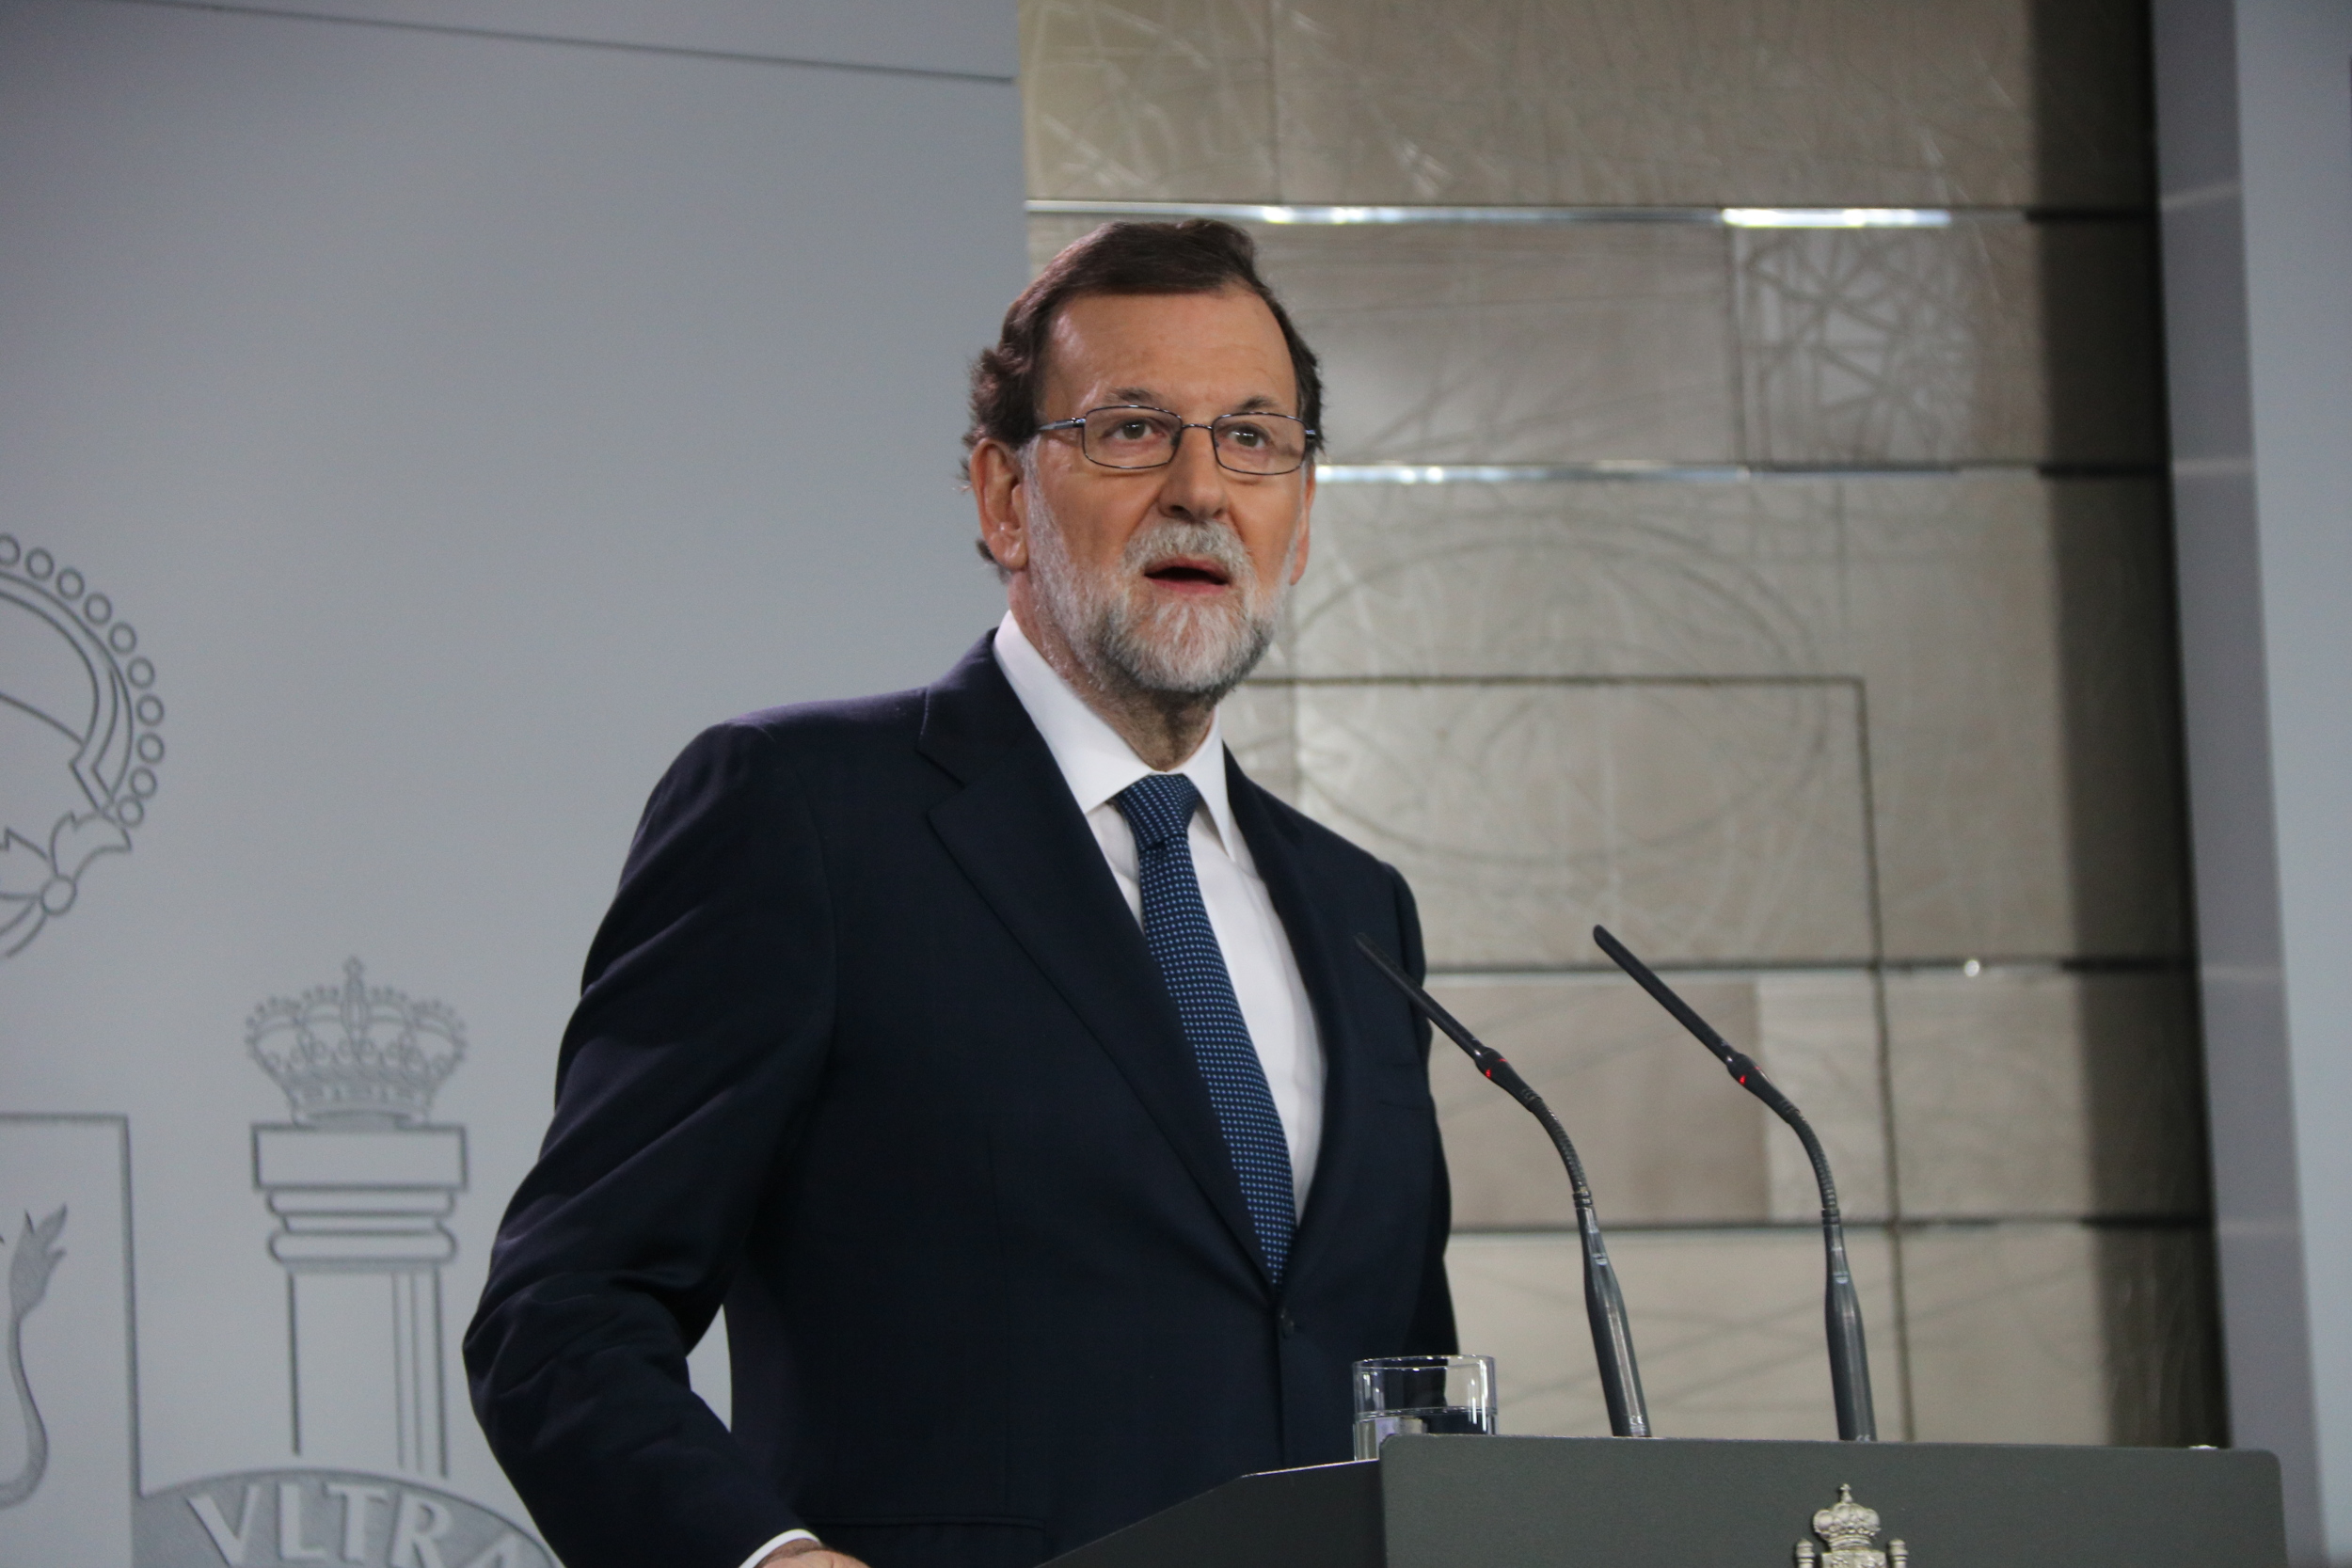 Spanish president Mariano Rajoy after his cabinet meeting on Wednesday (by Roger Pi de Cabanyes)